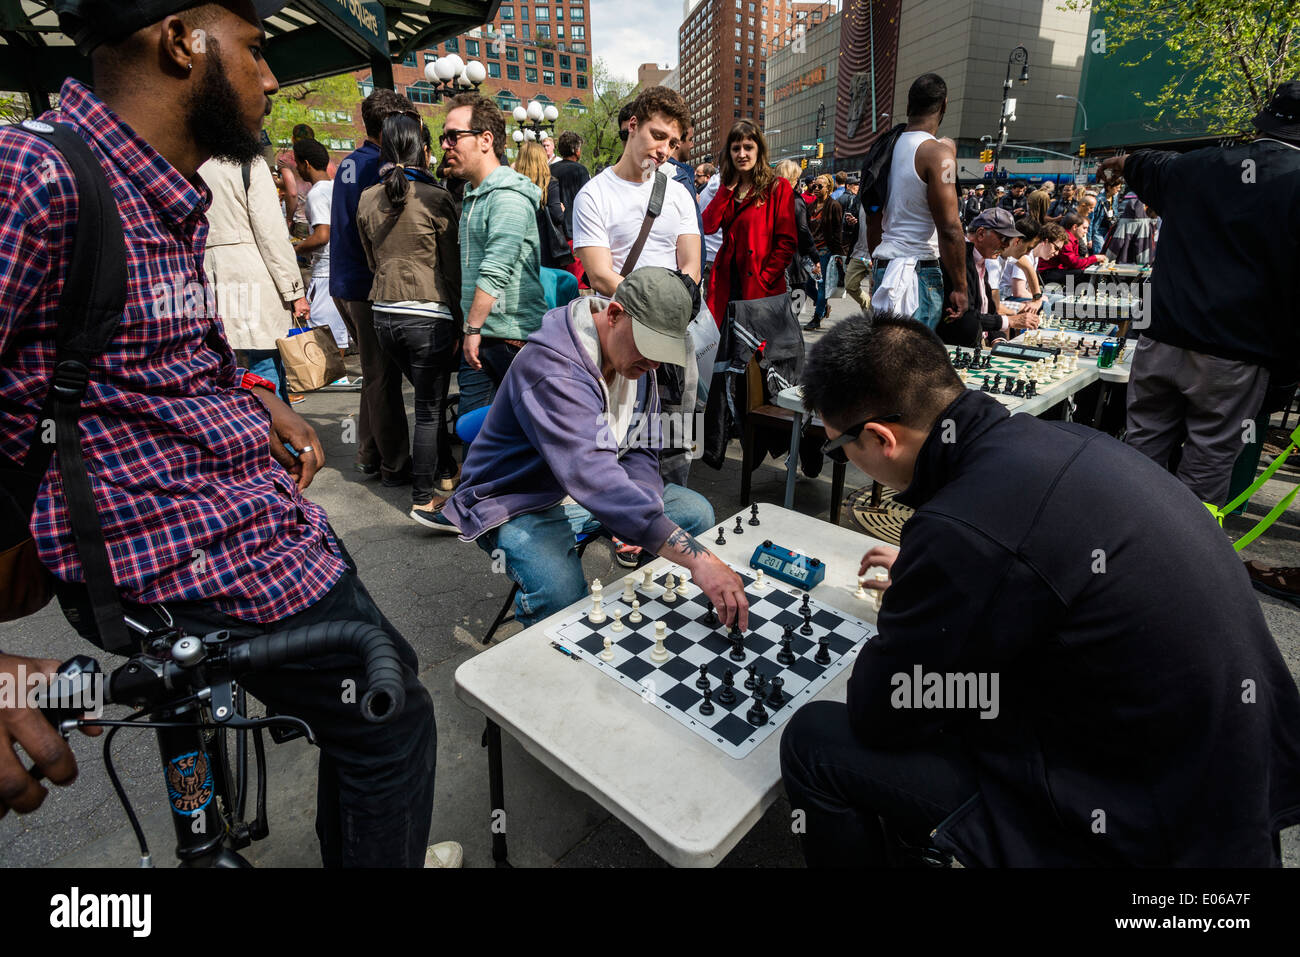 No mansplaining' and bisexual lighting: New York's new chess clubs make it  hip to be square, Chess